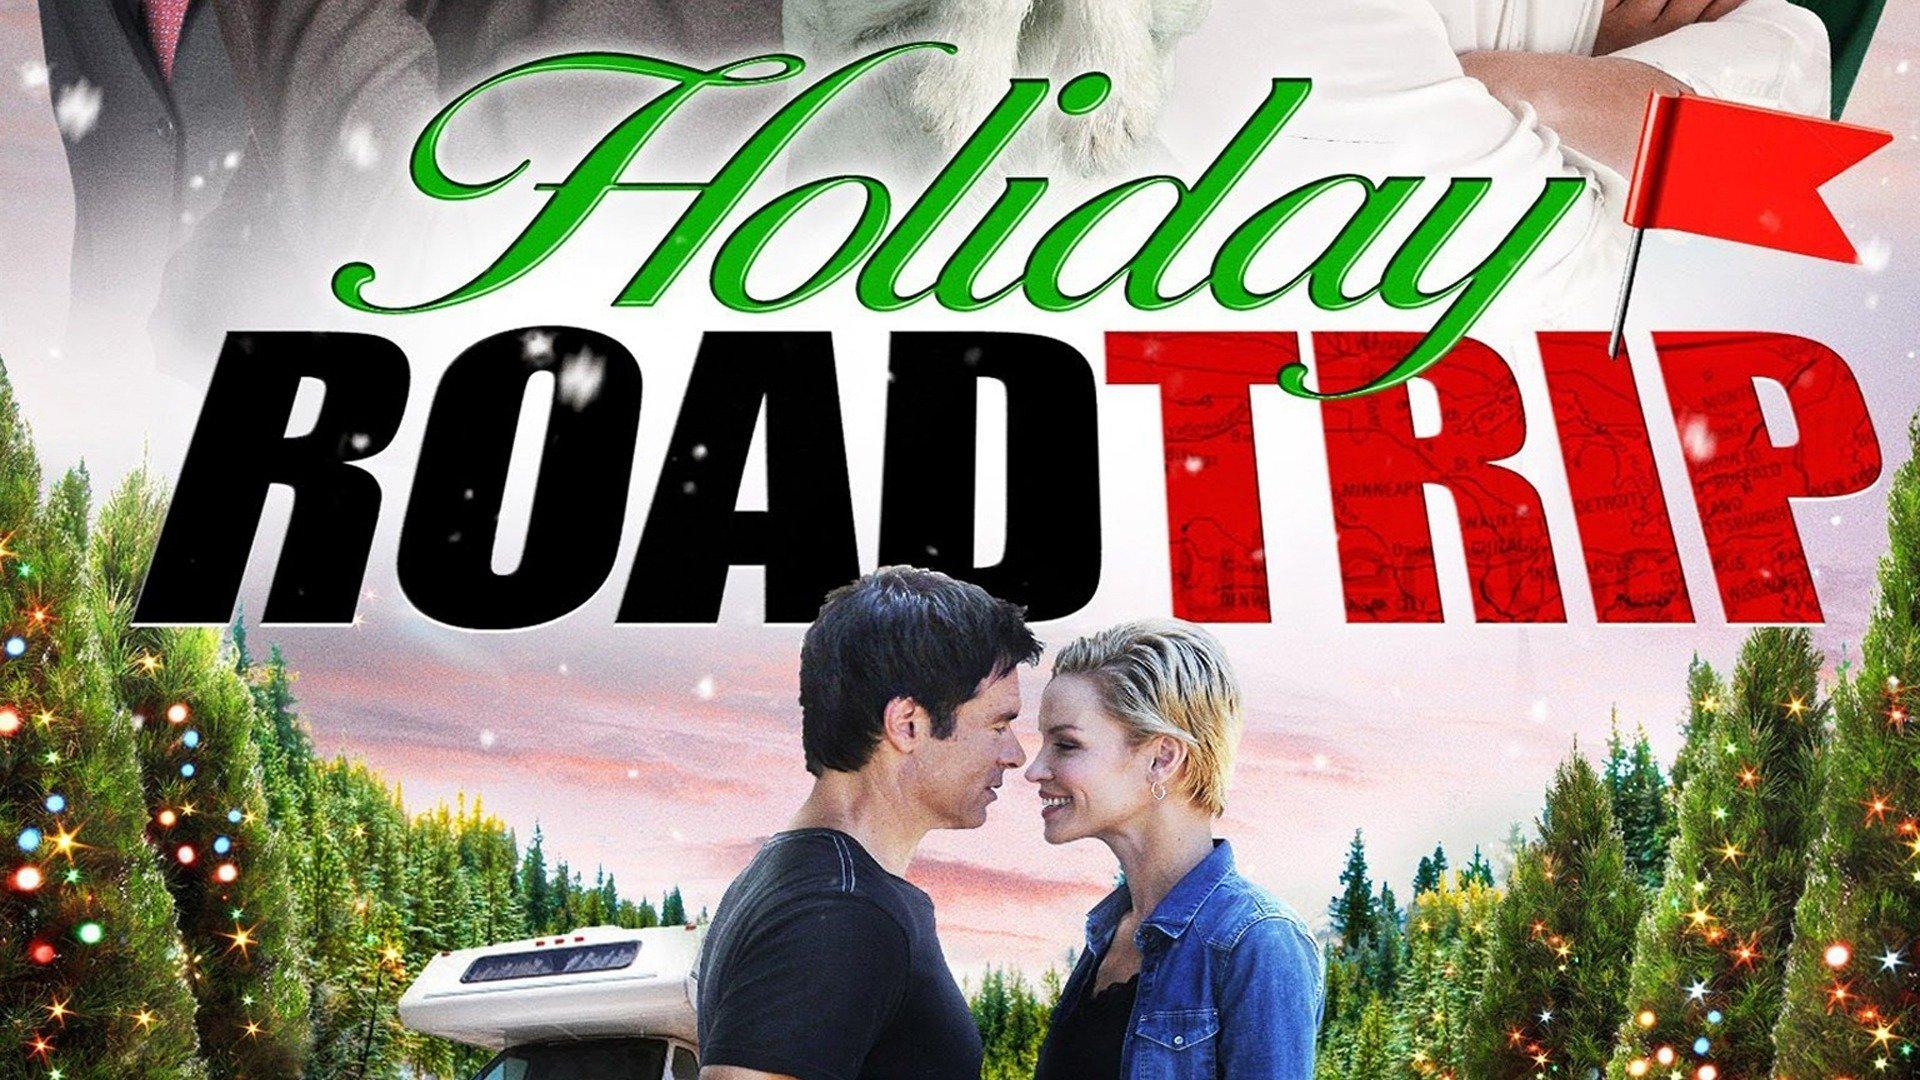 Watch Holiday Road Trip Streaming Online On Philo Free Trial